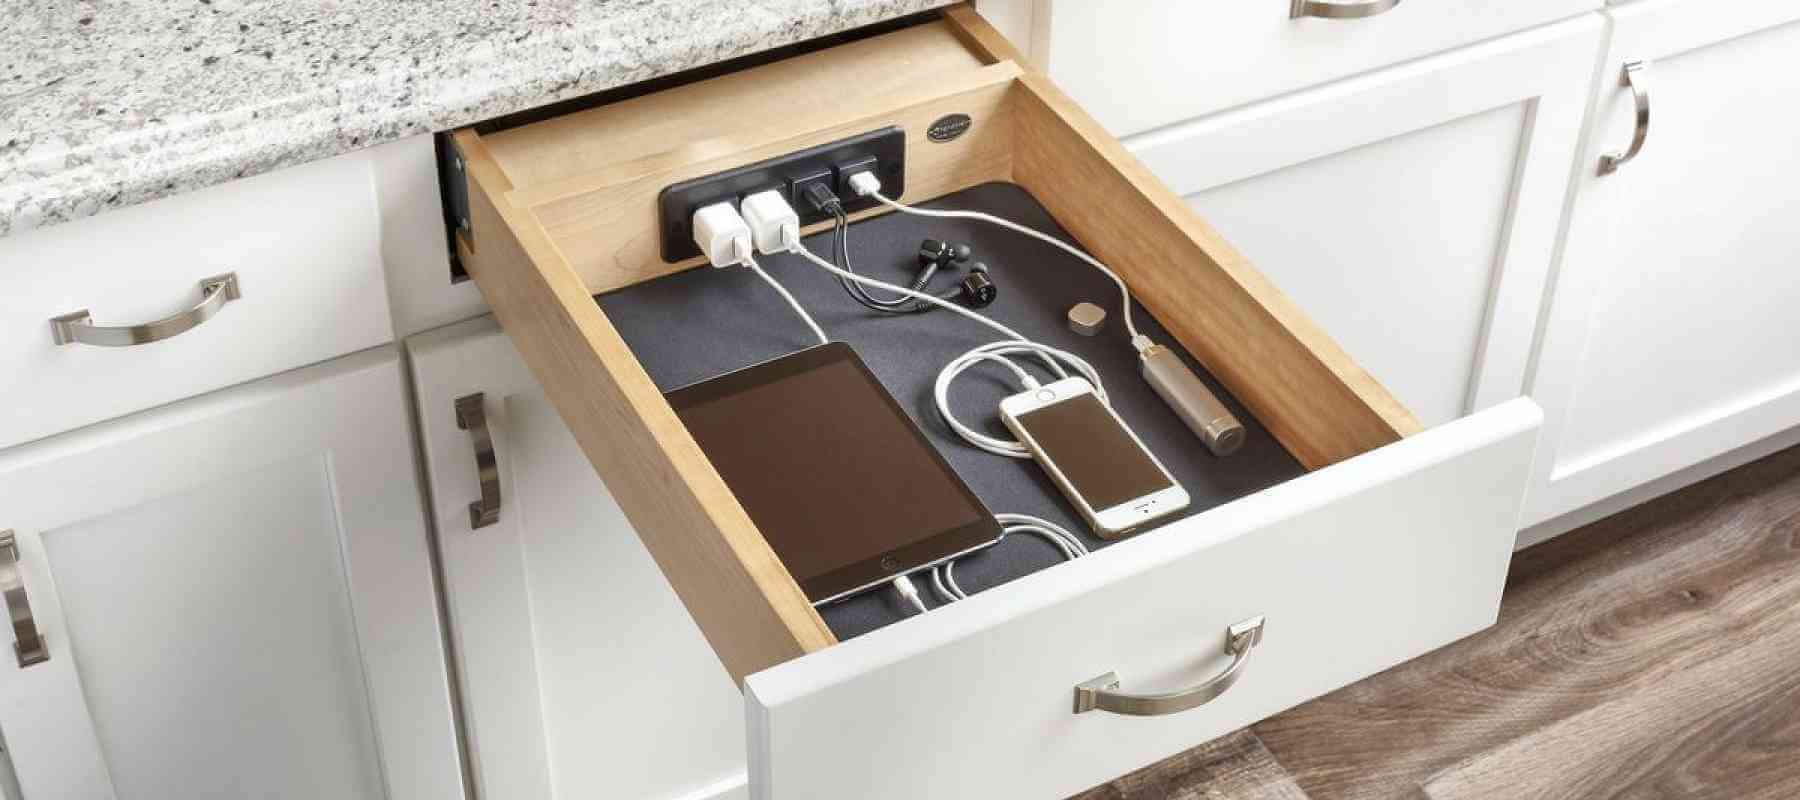 Tips to Organize Cabinets and Drawers